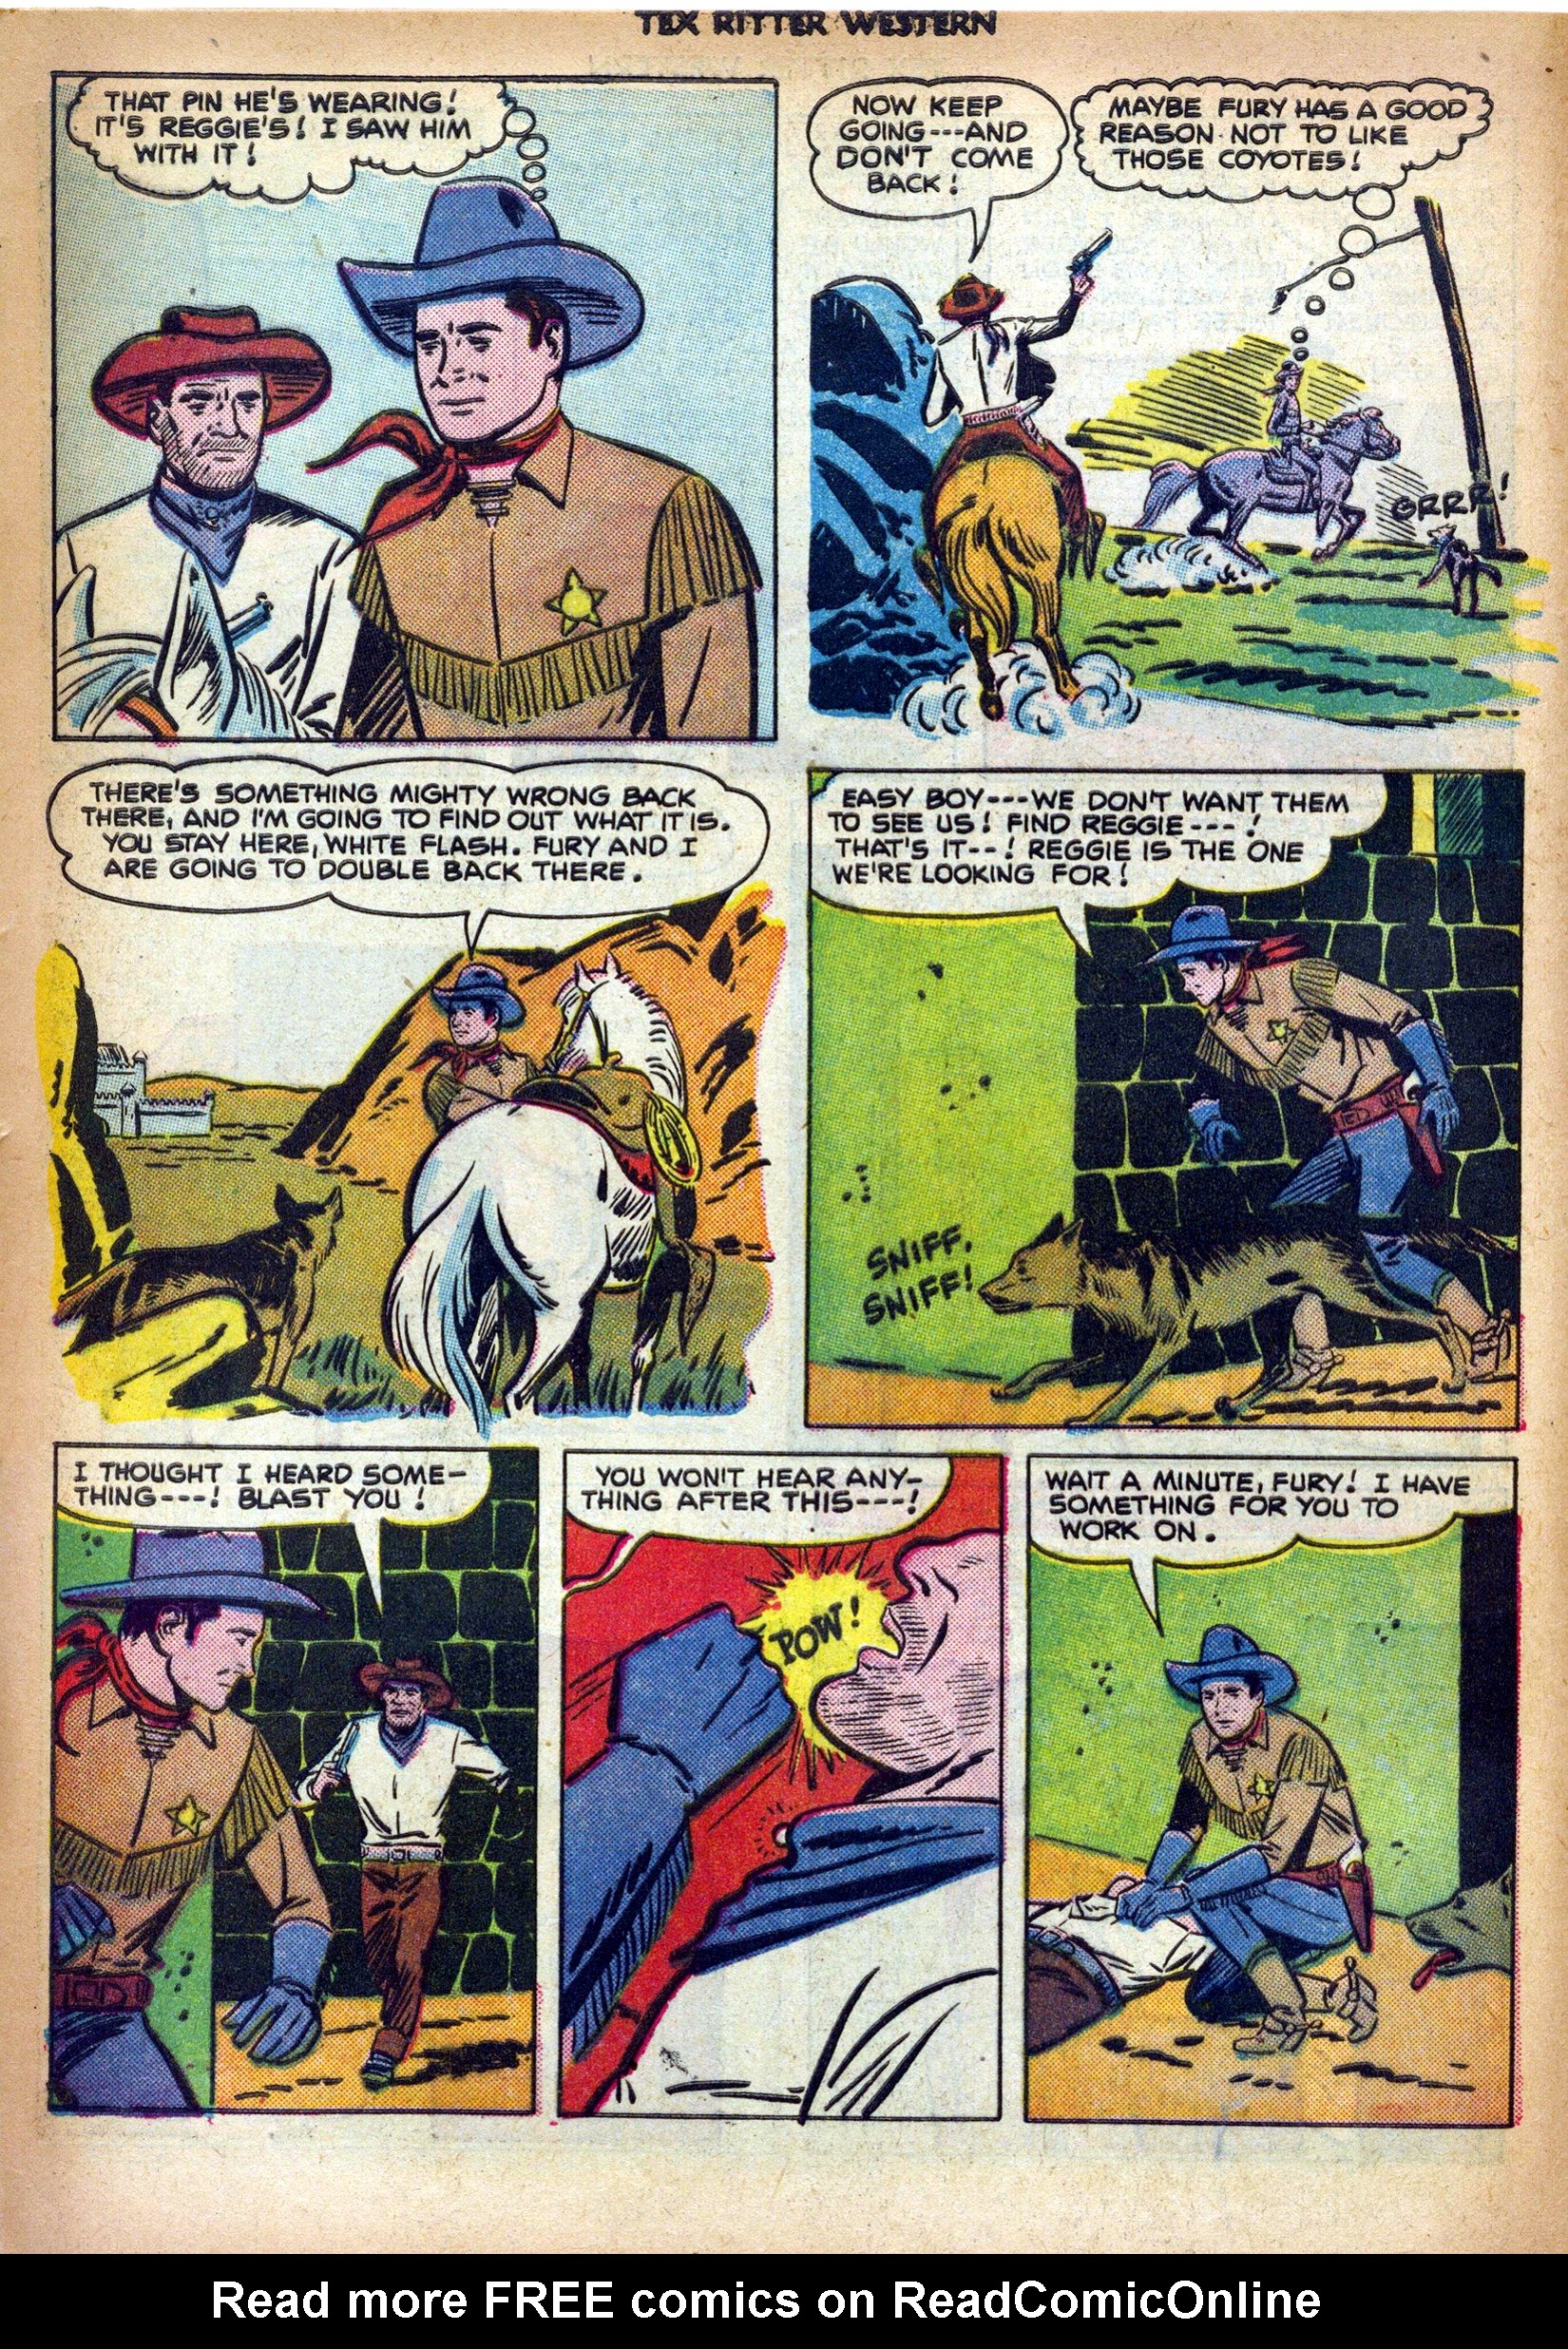 Read online Tex Ritter Western comic -  Issue #6 - 12